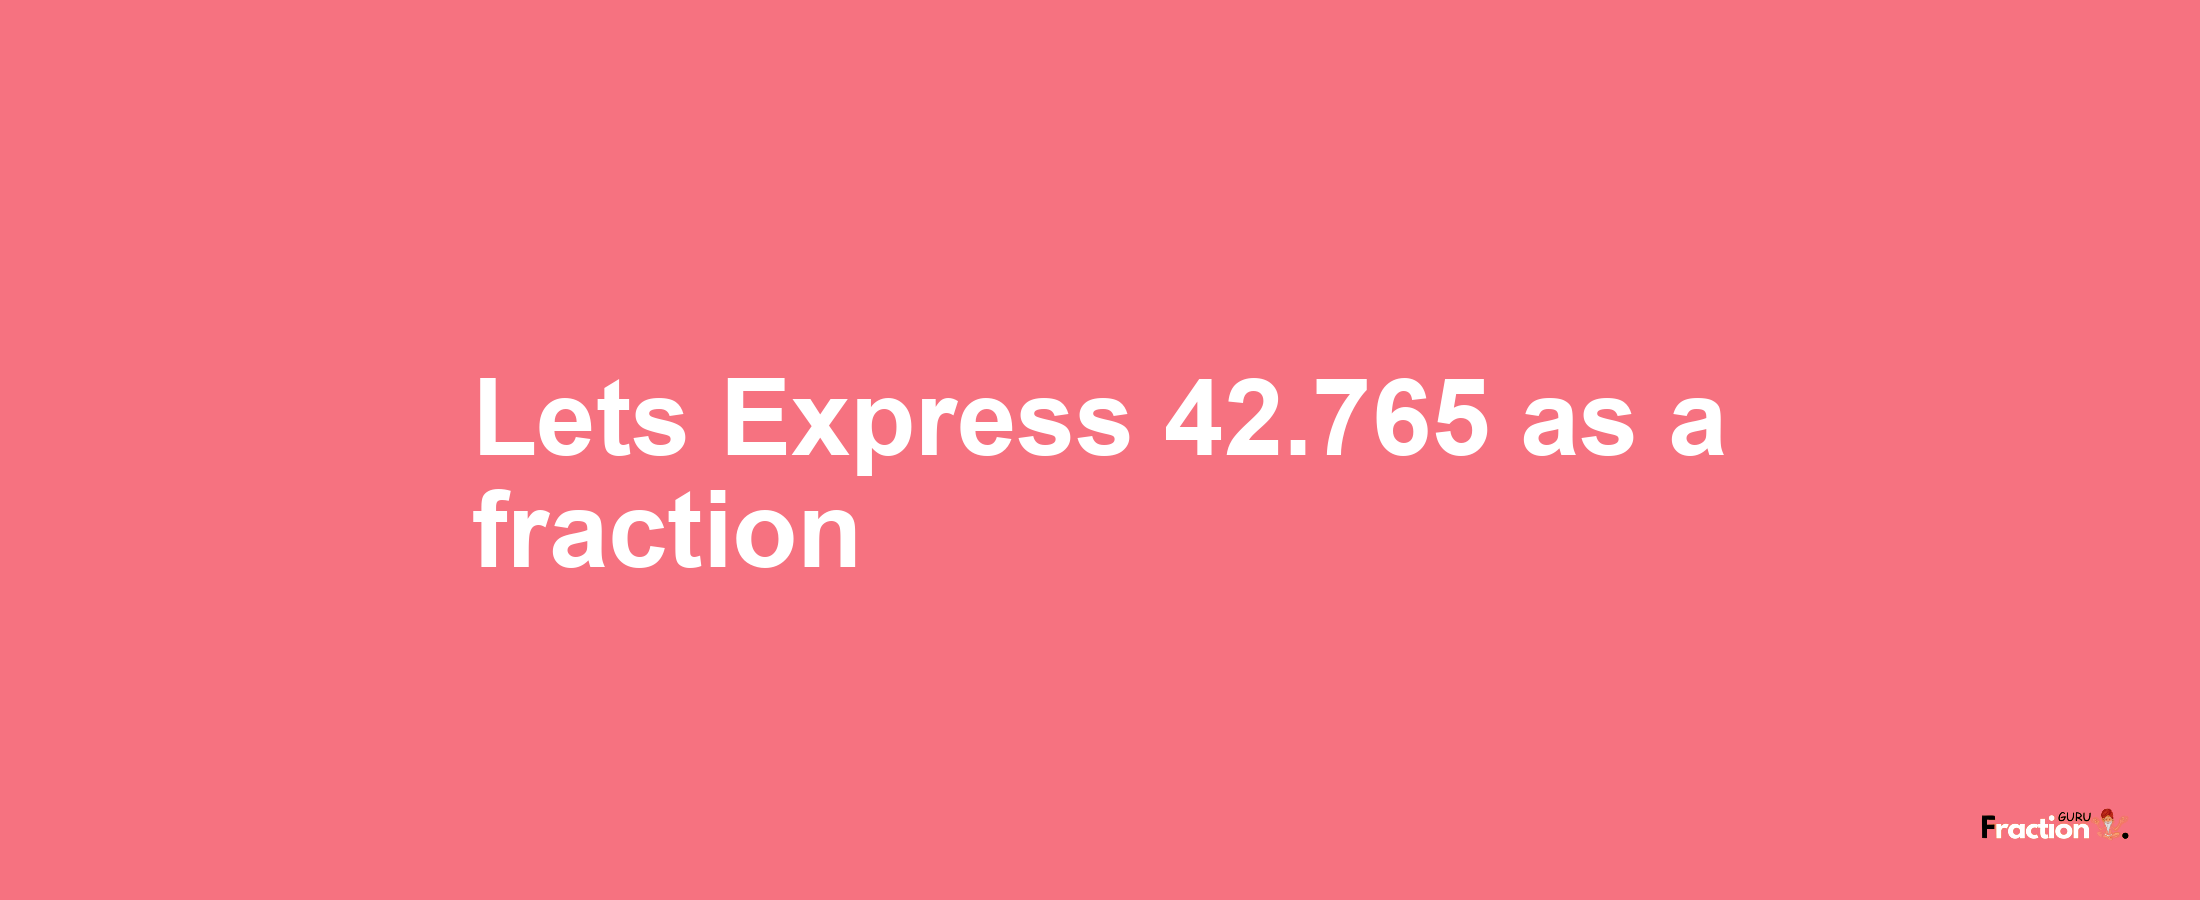 Lets Express 42.765 as afraction